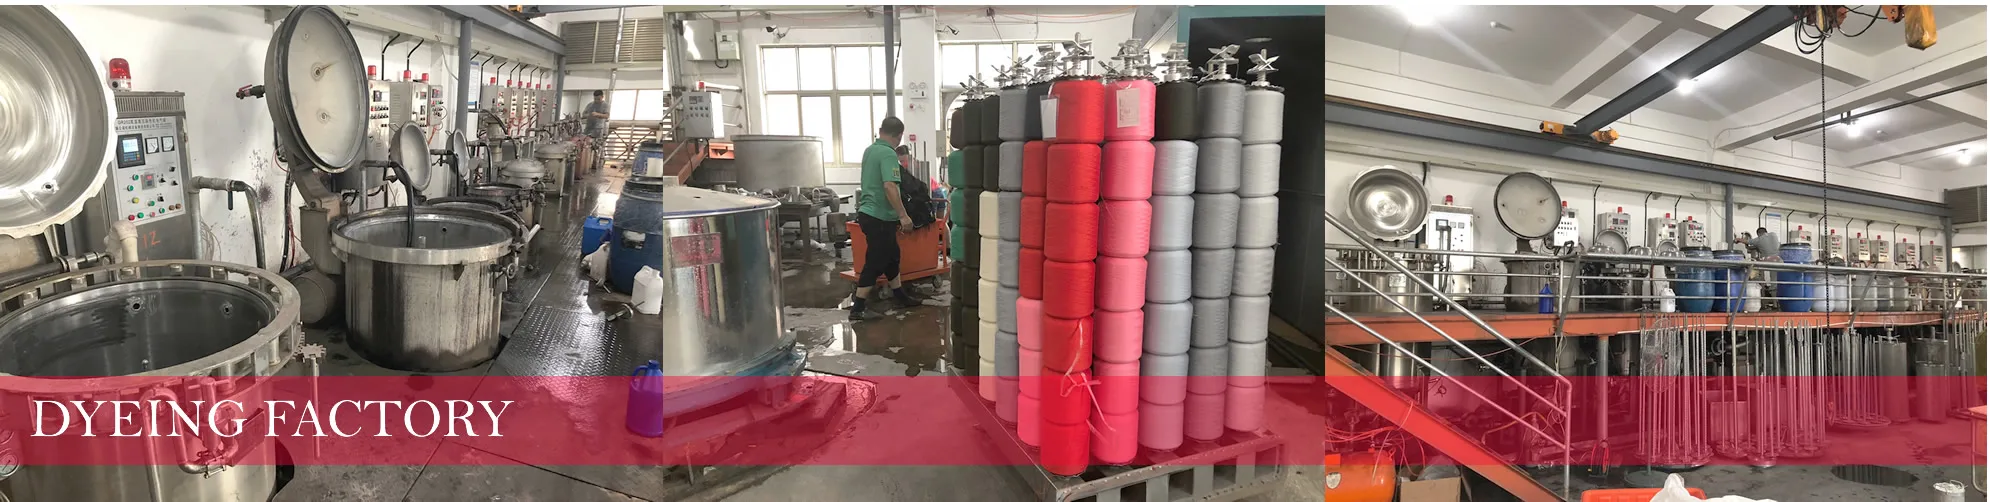 DYEING FACTORY